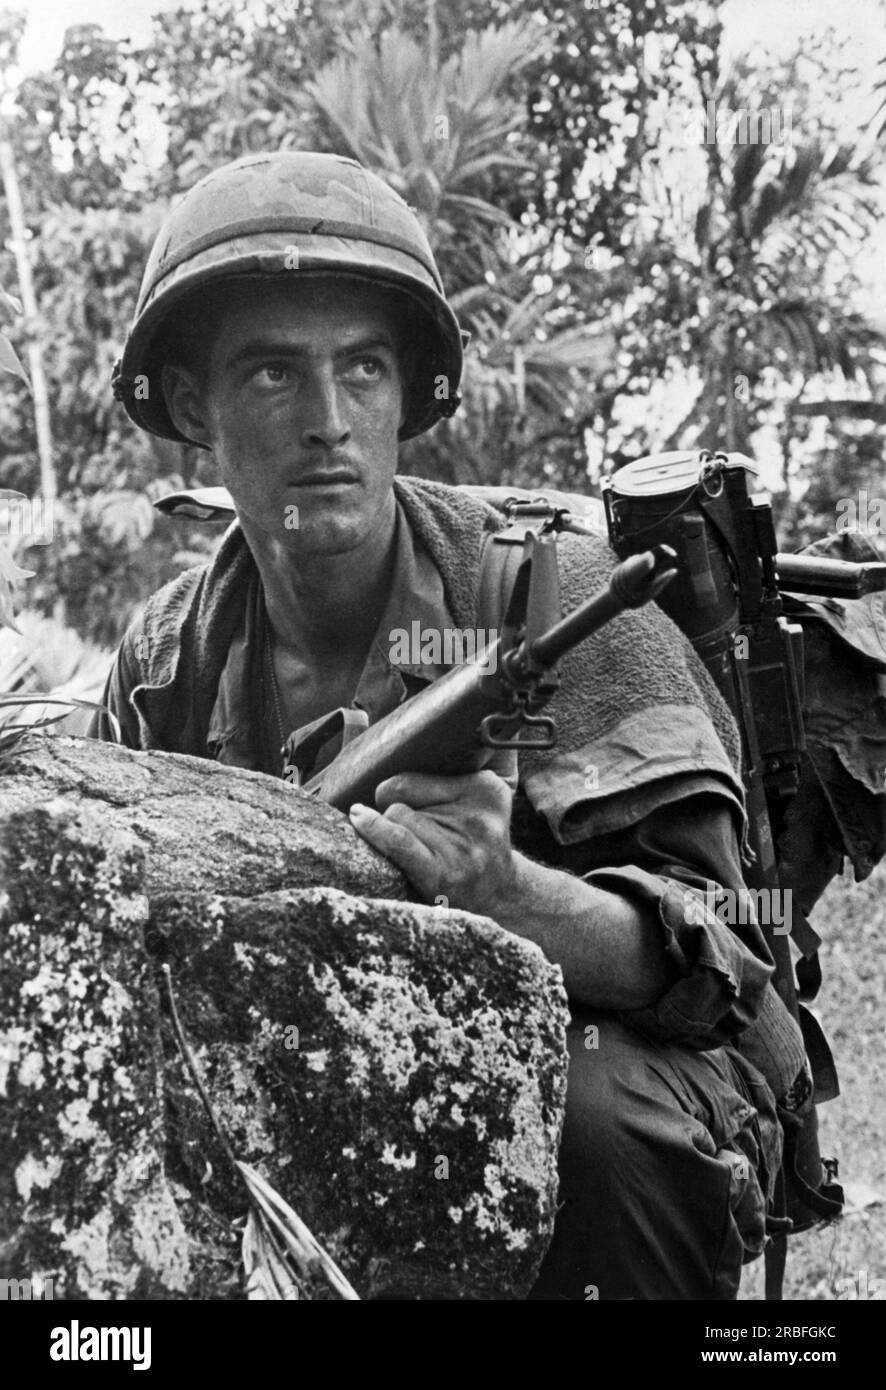 Vietnam:   March, 1968 A 101st Airborne soldier crouches behind a rock as he searches for a sniper in the trees ahead. Stock Photo